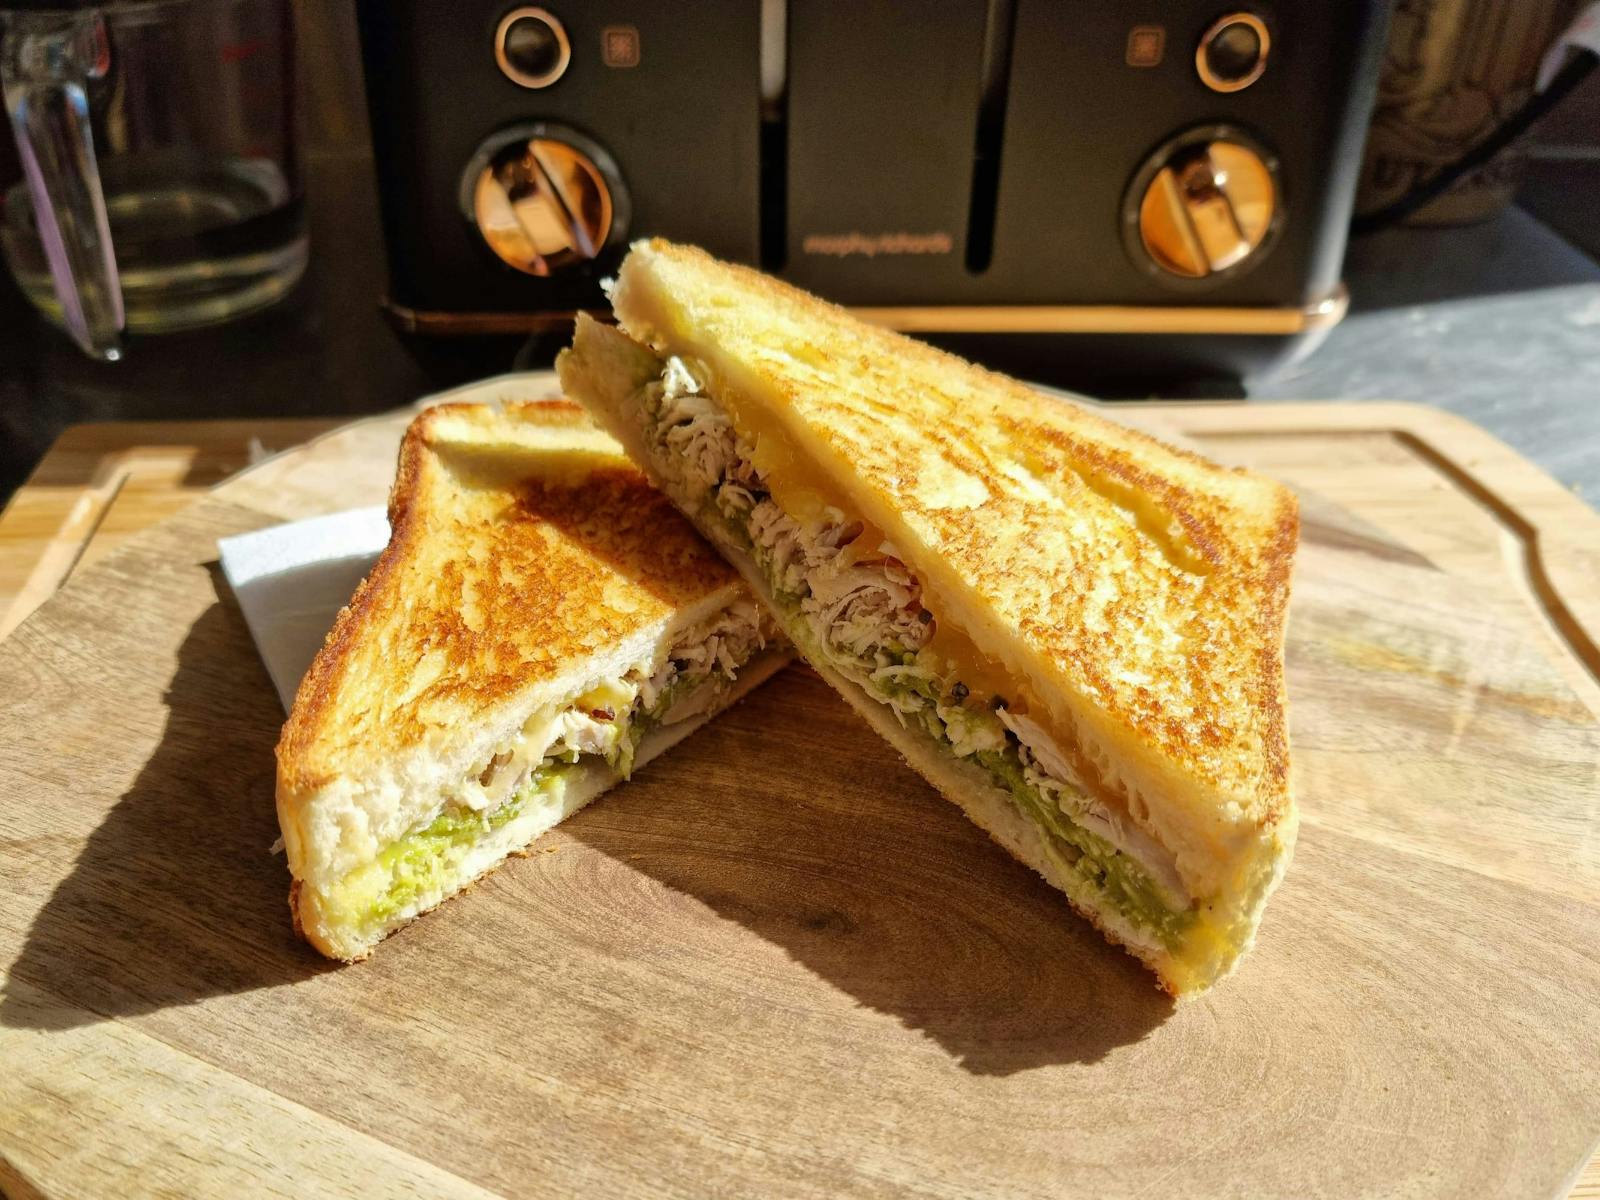 One of many toasties available